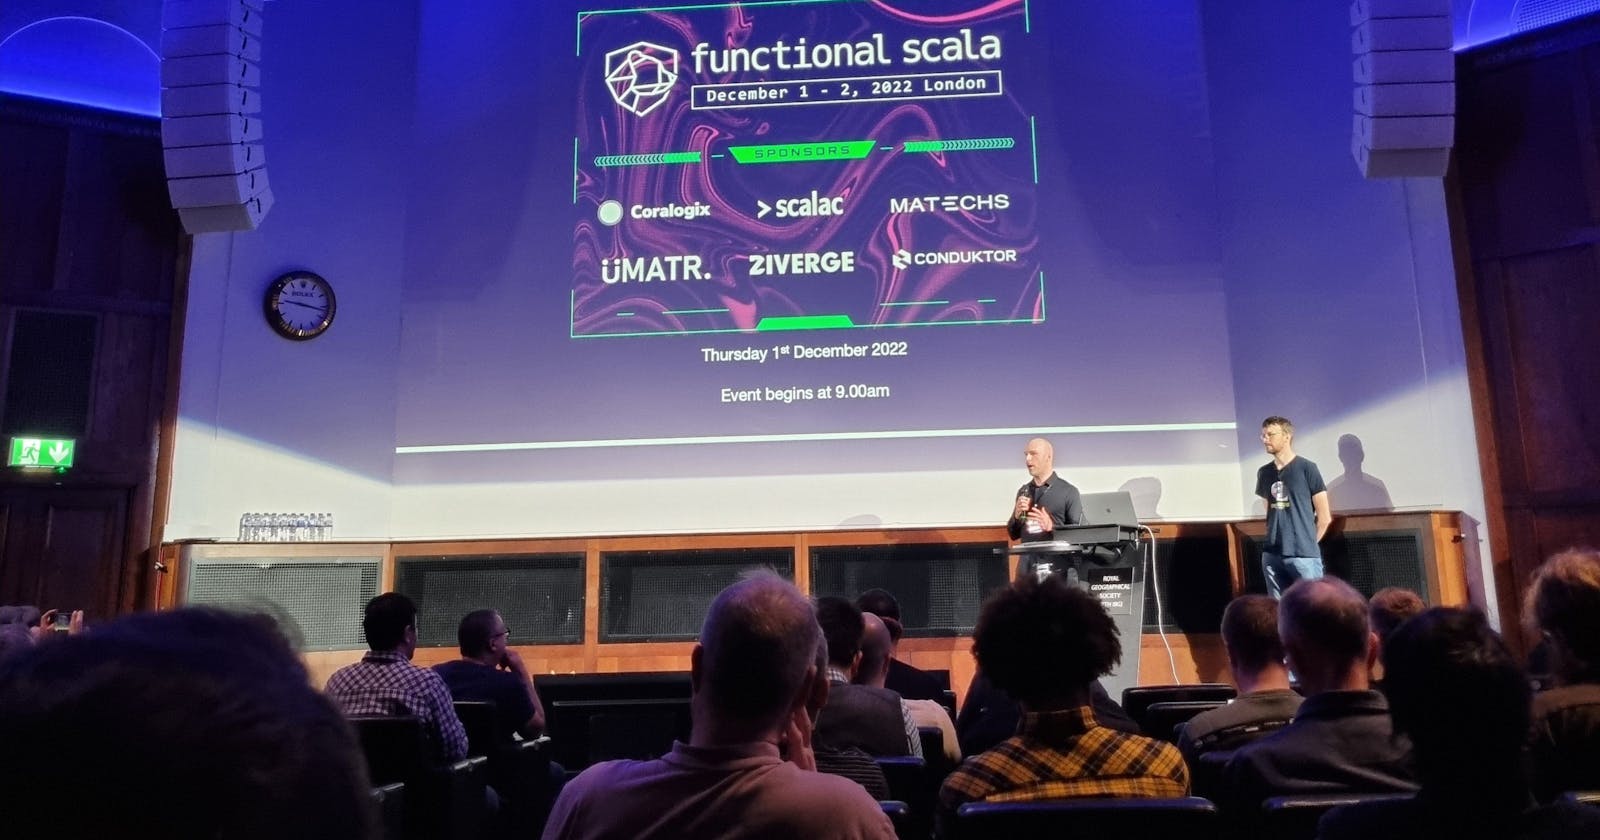 My thoughts about Functional Scala 2022 - London